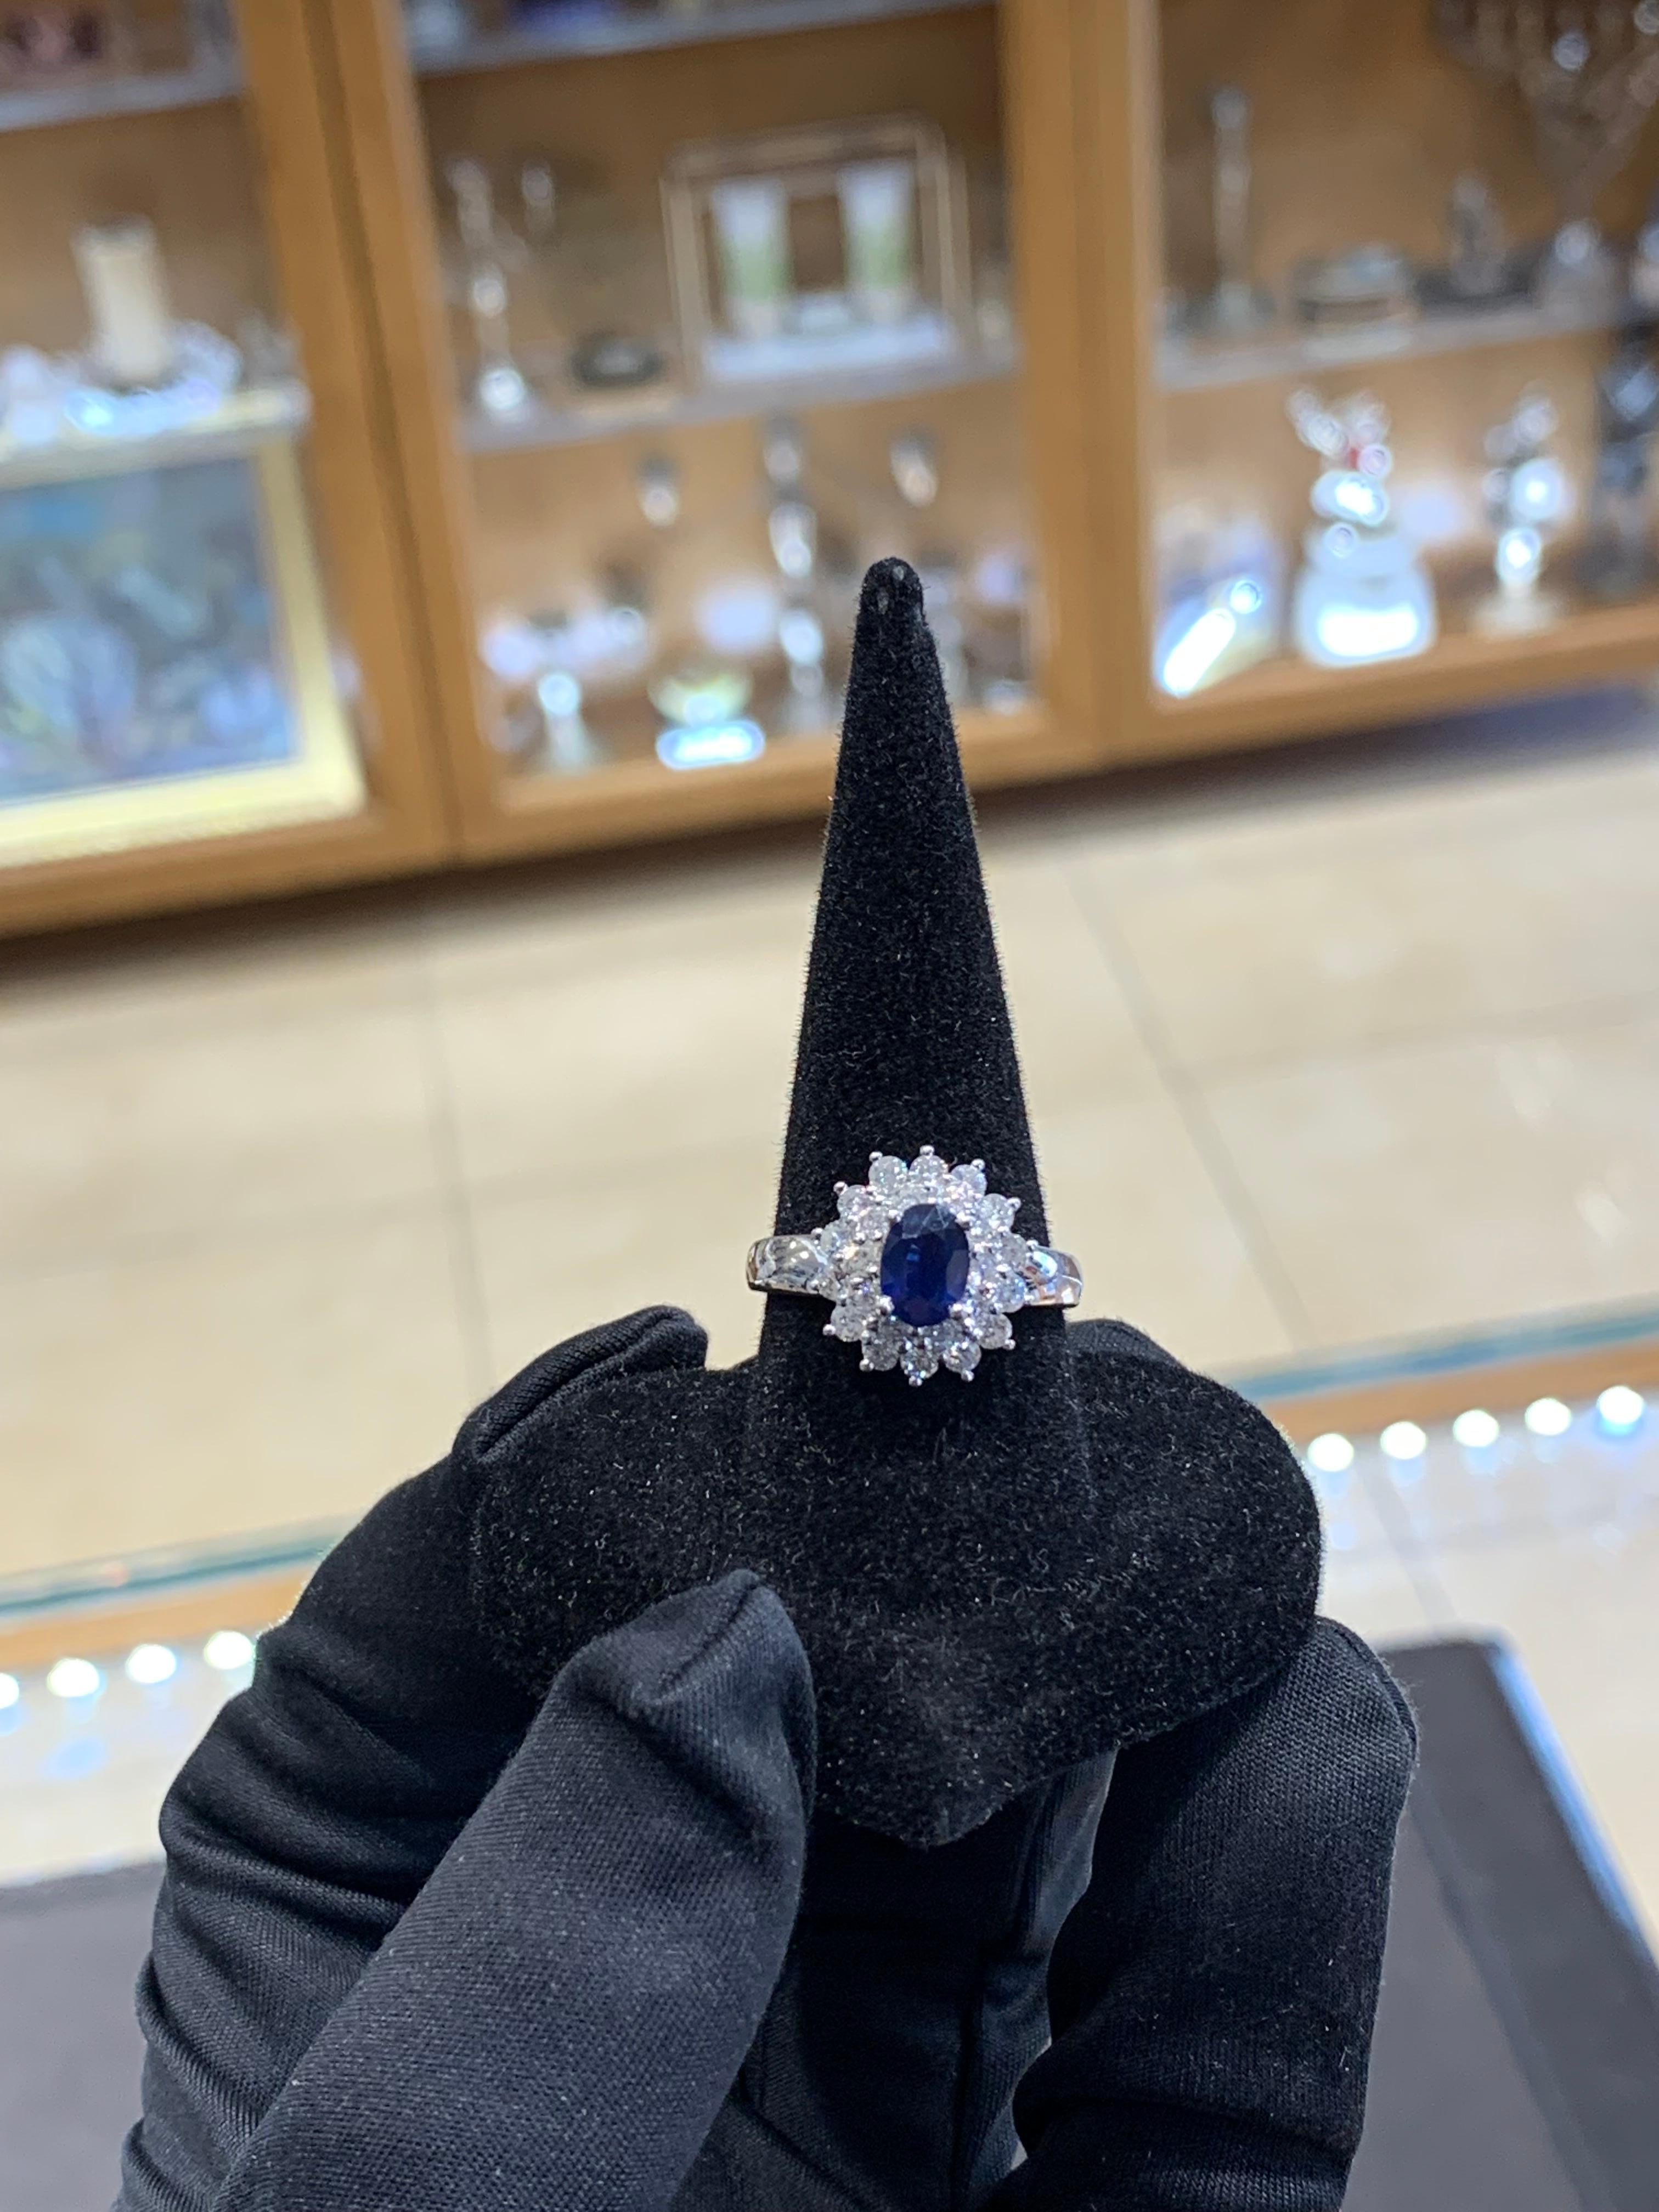 Beautifully Hand Crafted 14k White Gold Blue Sapphire & Diamond Ring.
Amazing Shine, Incredible Craftsmanship.
Great Statement Piece.
Approximately 1.05 Carat Blue Sapphire.
Approximately 0.80 Carats Of Diamonds.
Only The Best Quality Stones. Nice &